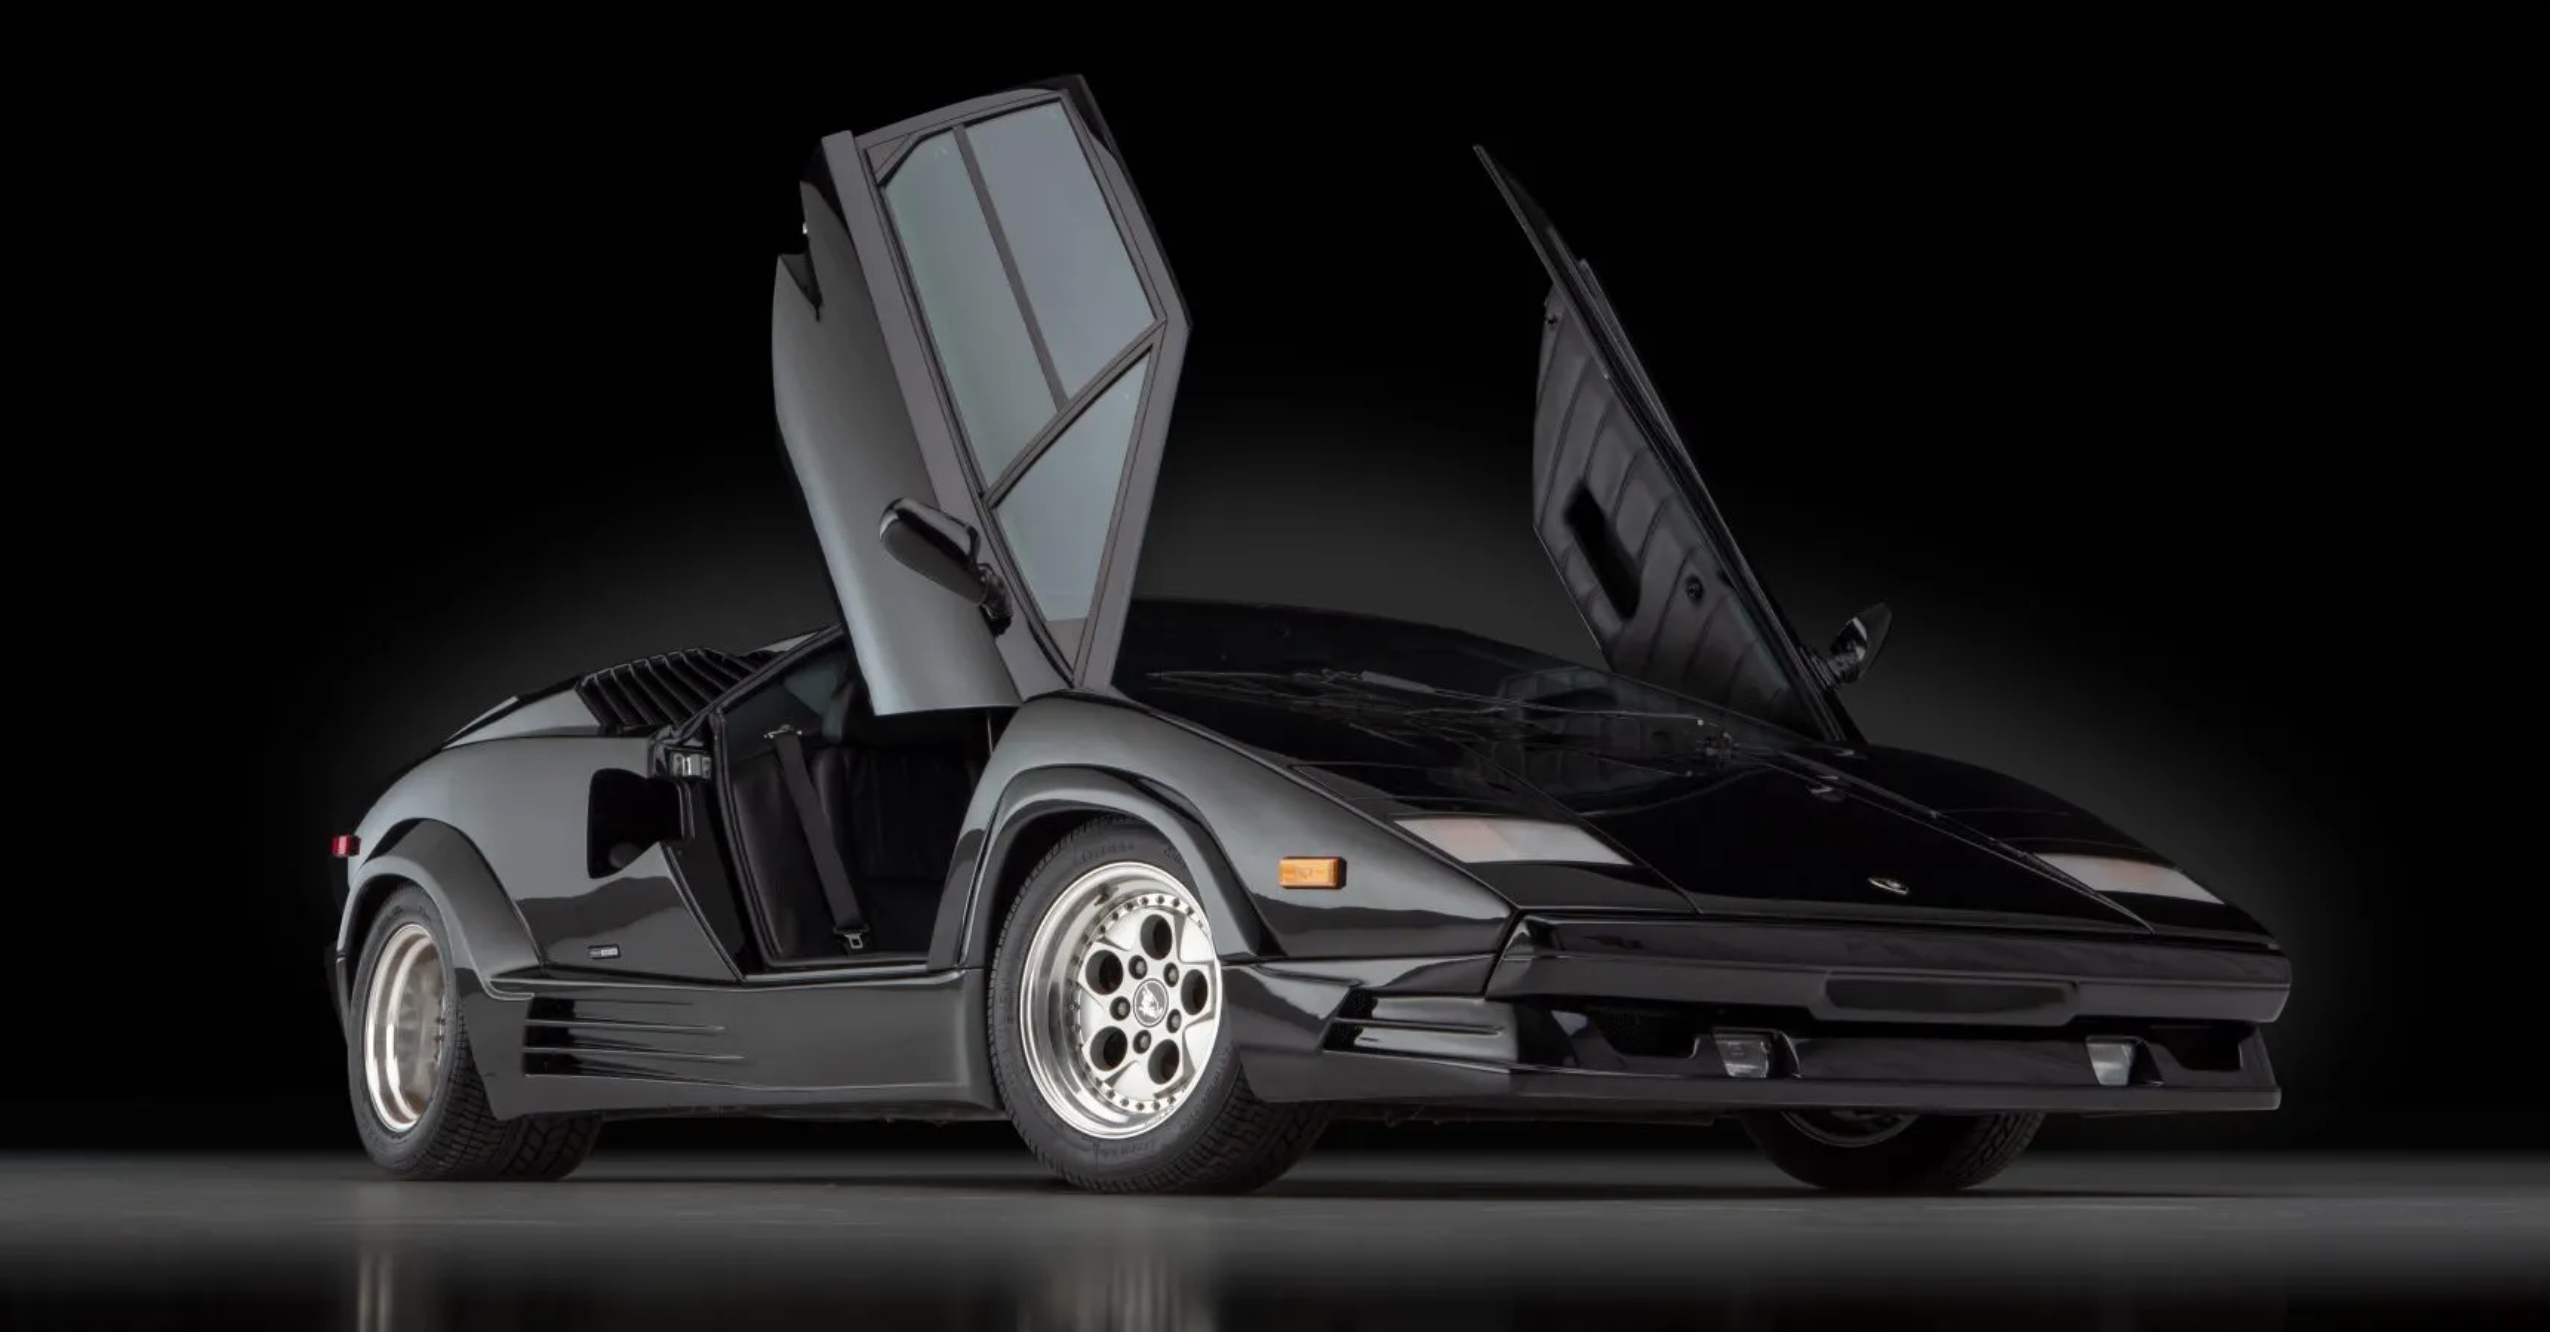 This Black-On-Black Lamborghini Countach 25th Anniversary Edition Can Be Yours